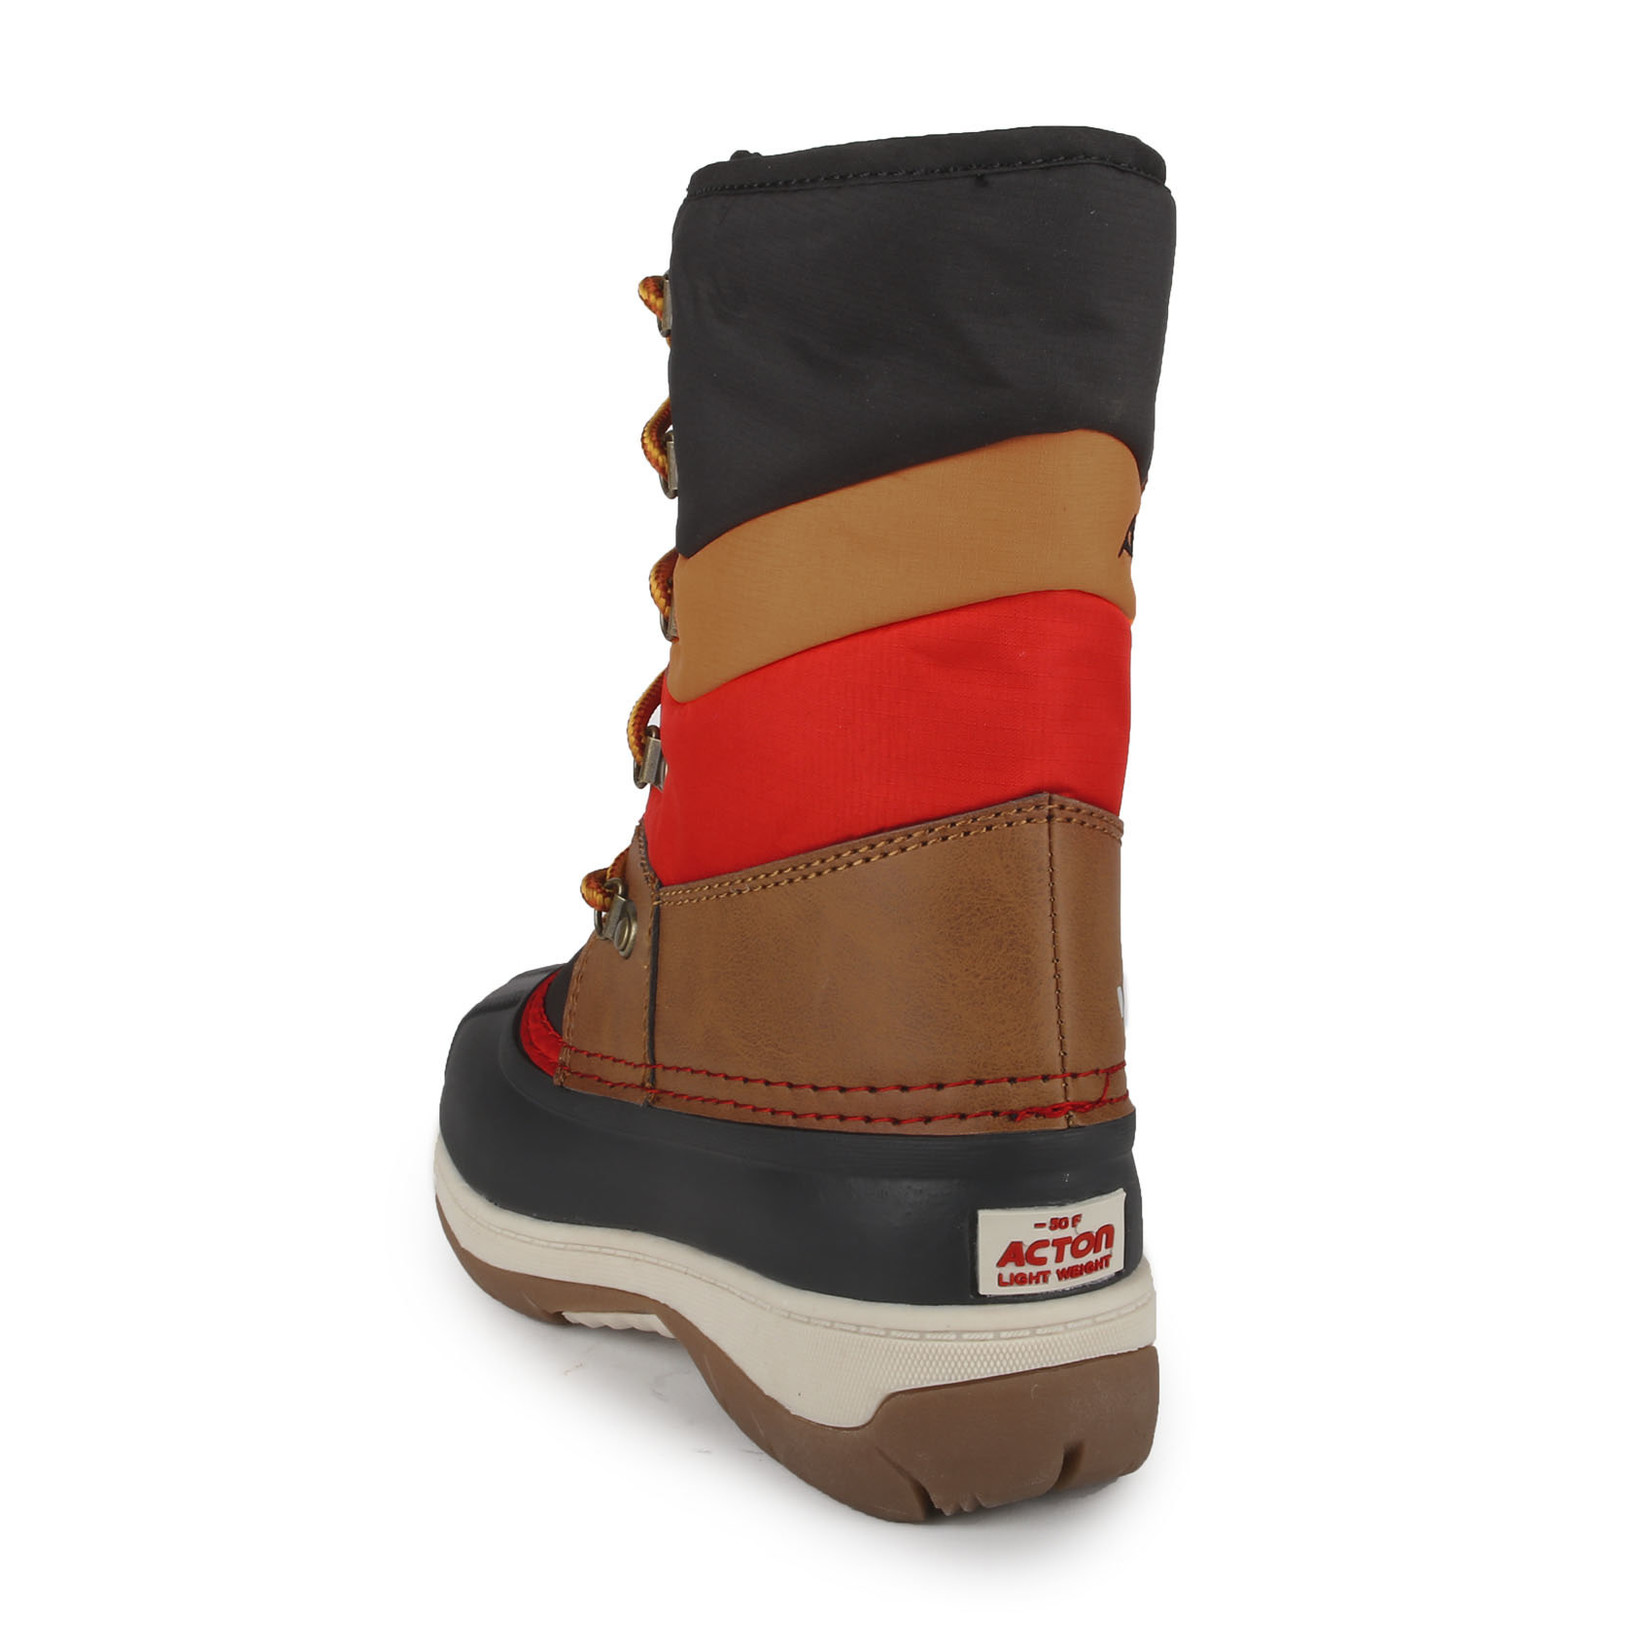 Acton ACTON - Winter Boots 'Gummy - Black and Tan'